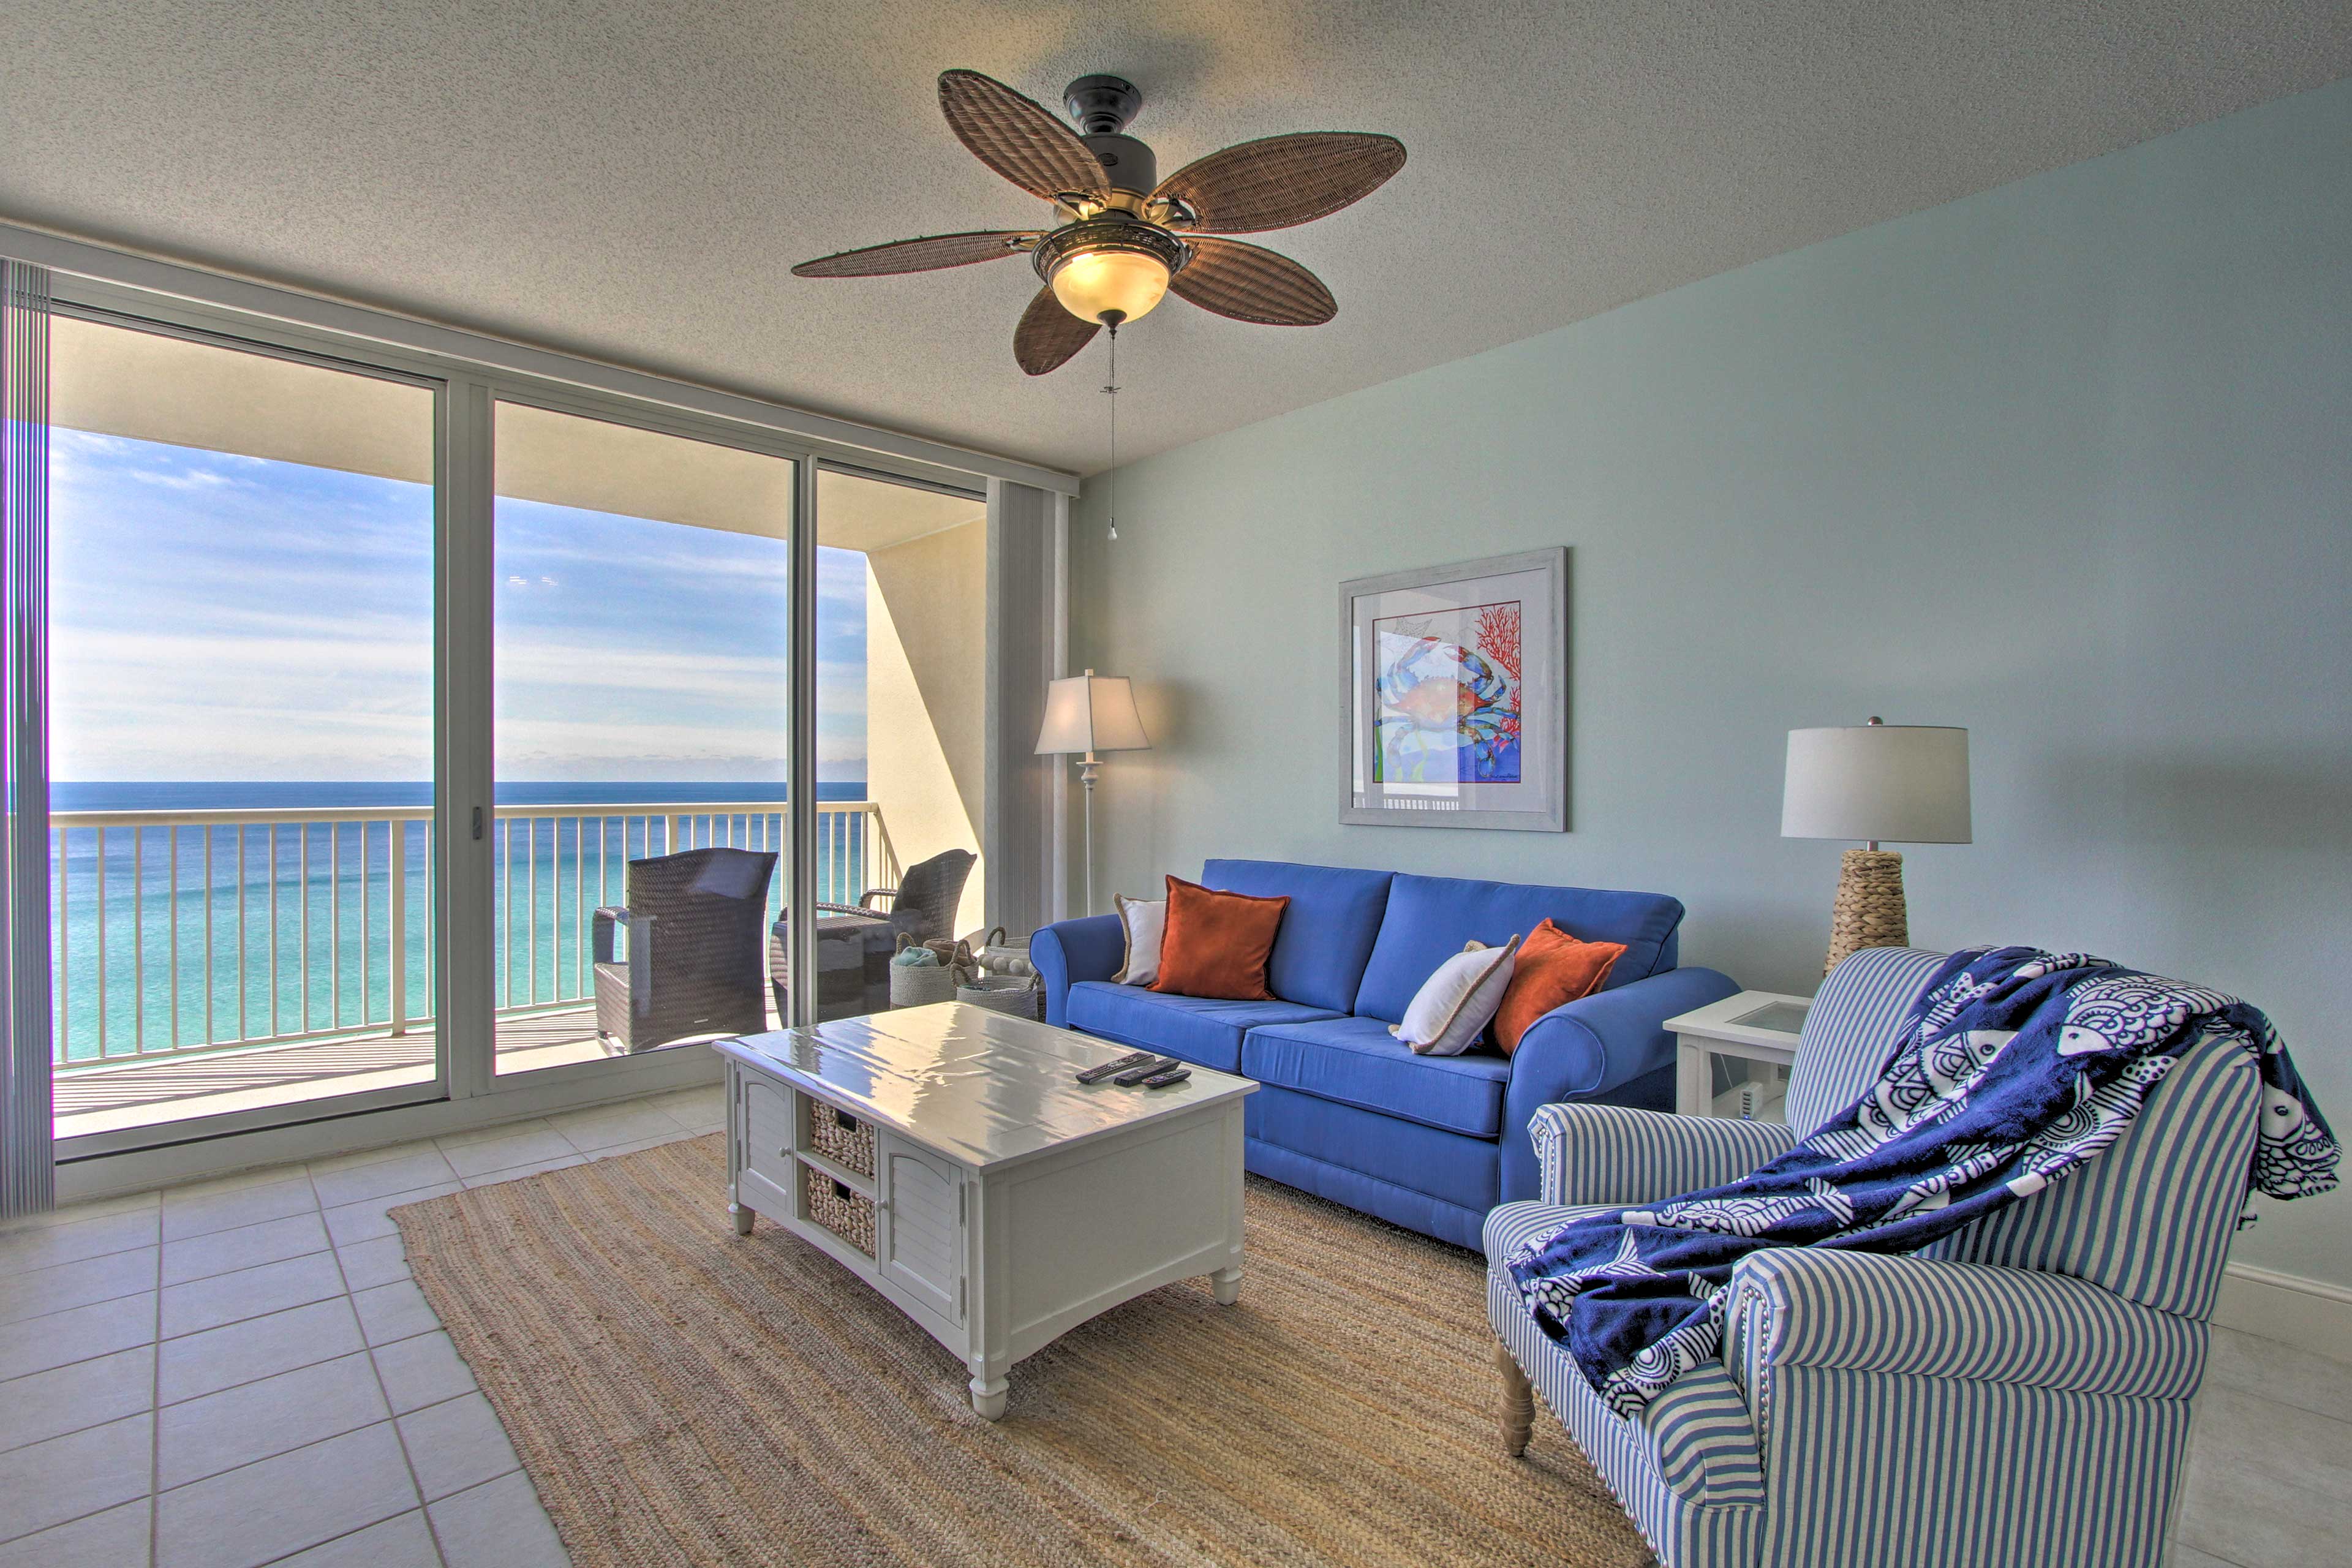 Hang out together in the breezy 9th-floor living room of this condo!